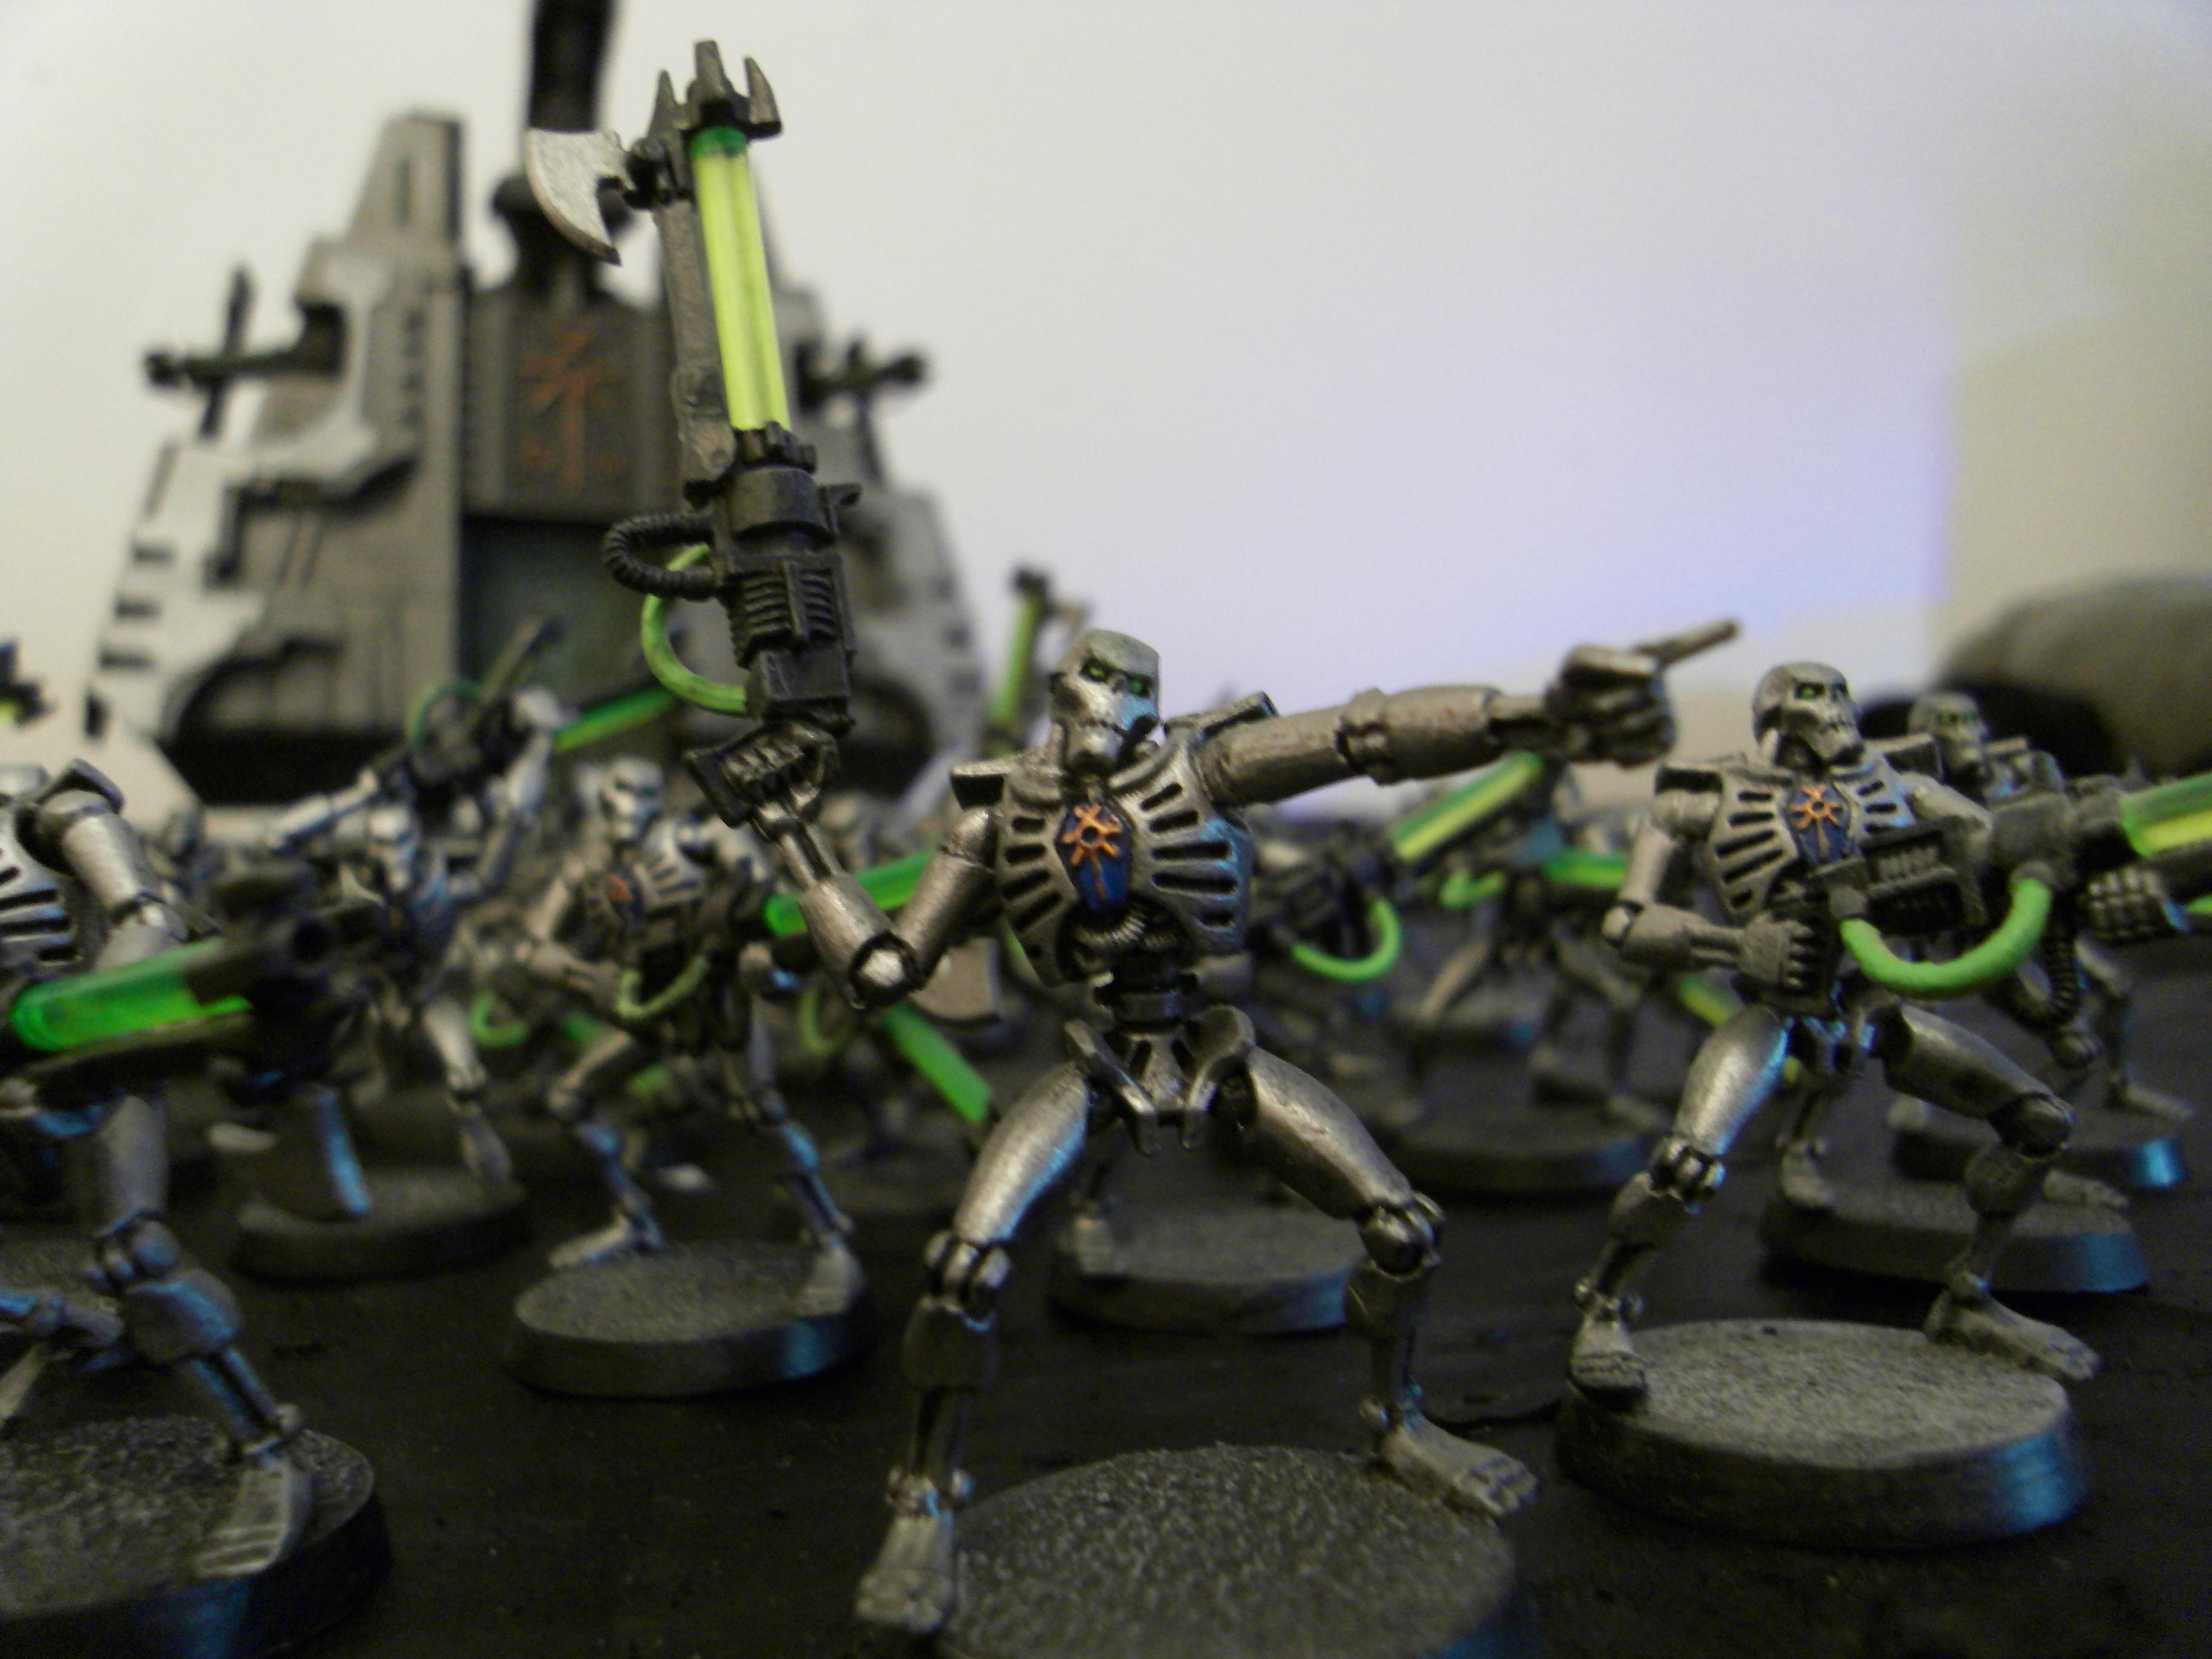 Army, Command Barge, Conversion, Destroyer, Immortals, Lord, Monolith, Necrons, Scarabs, Warhammer 40,000, Warhammer Fantasy, Warriors, Wraiths